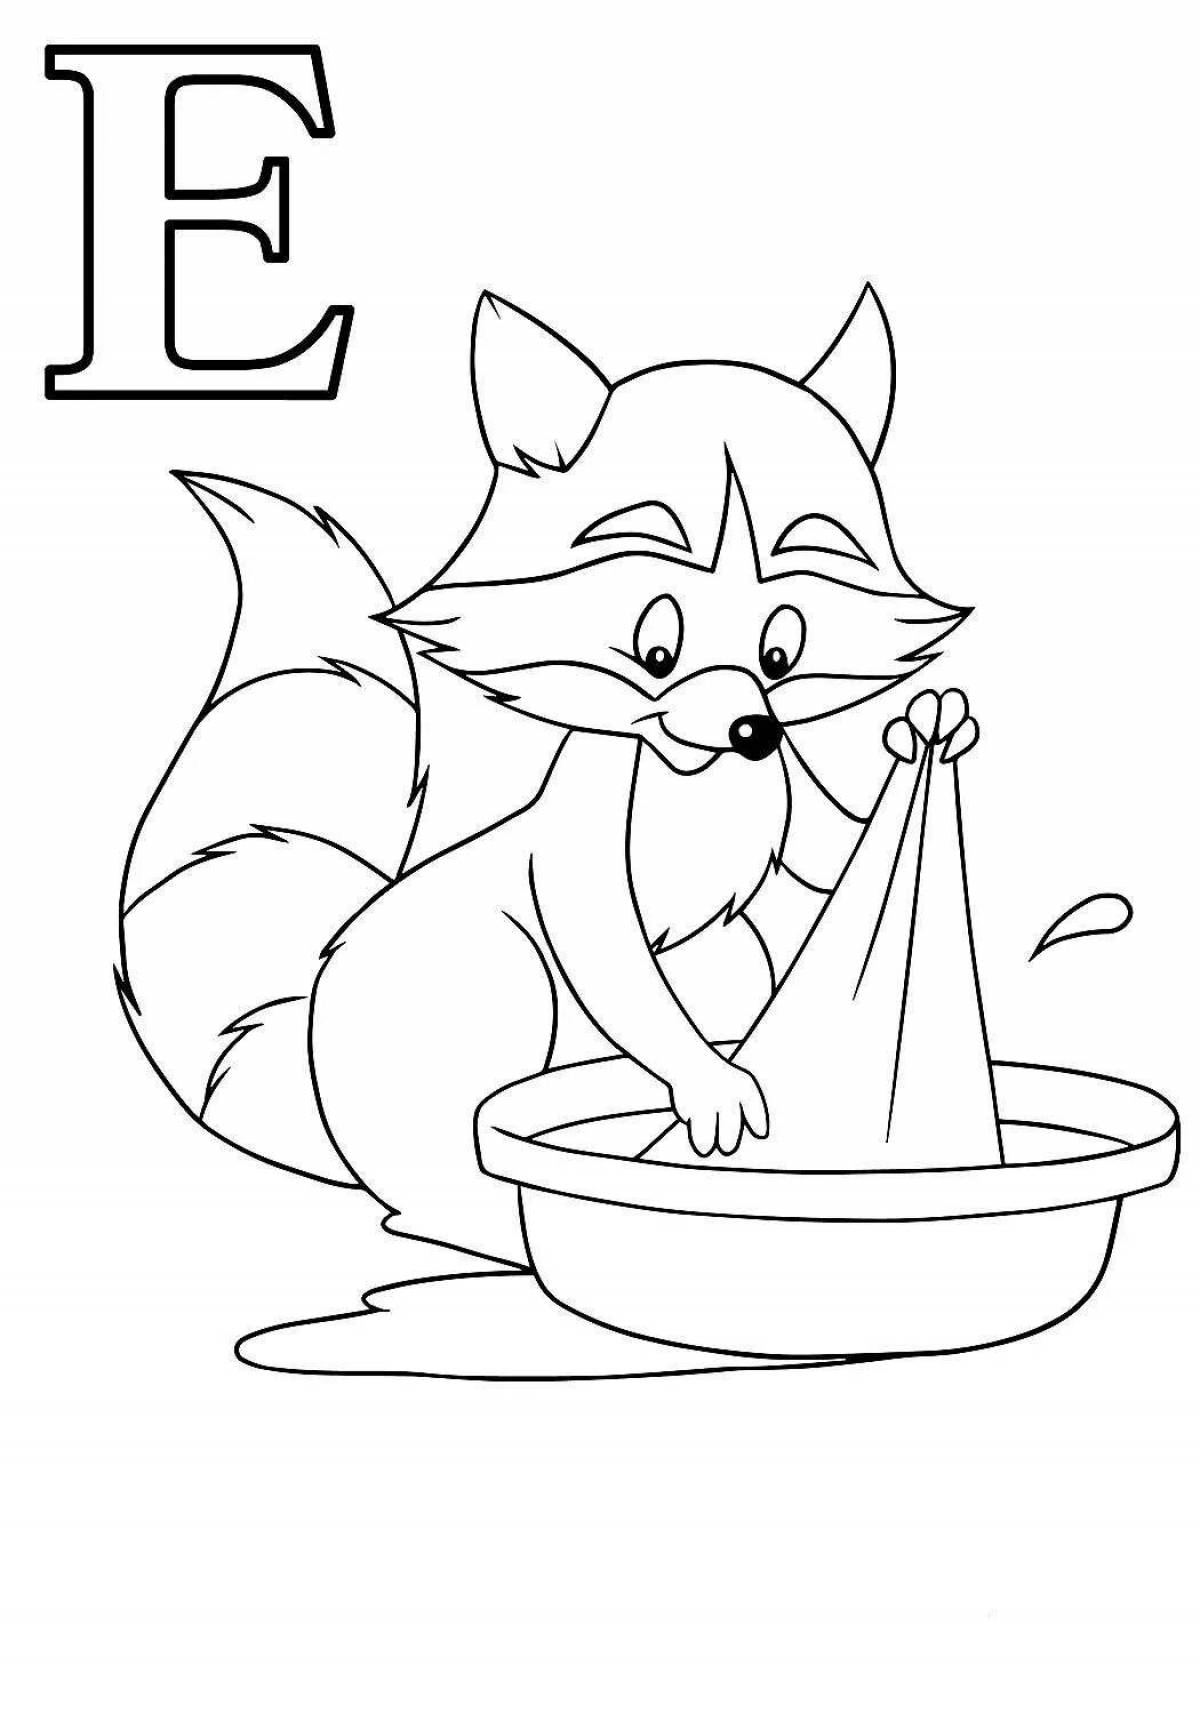 Coloring book with the letter e for children